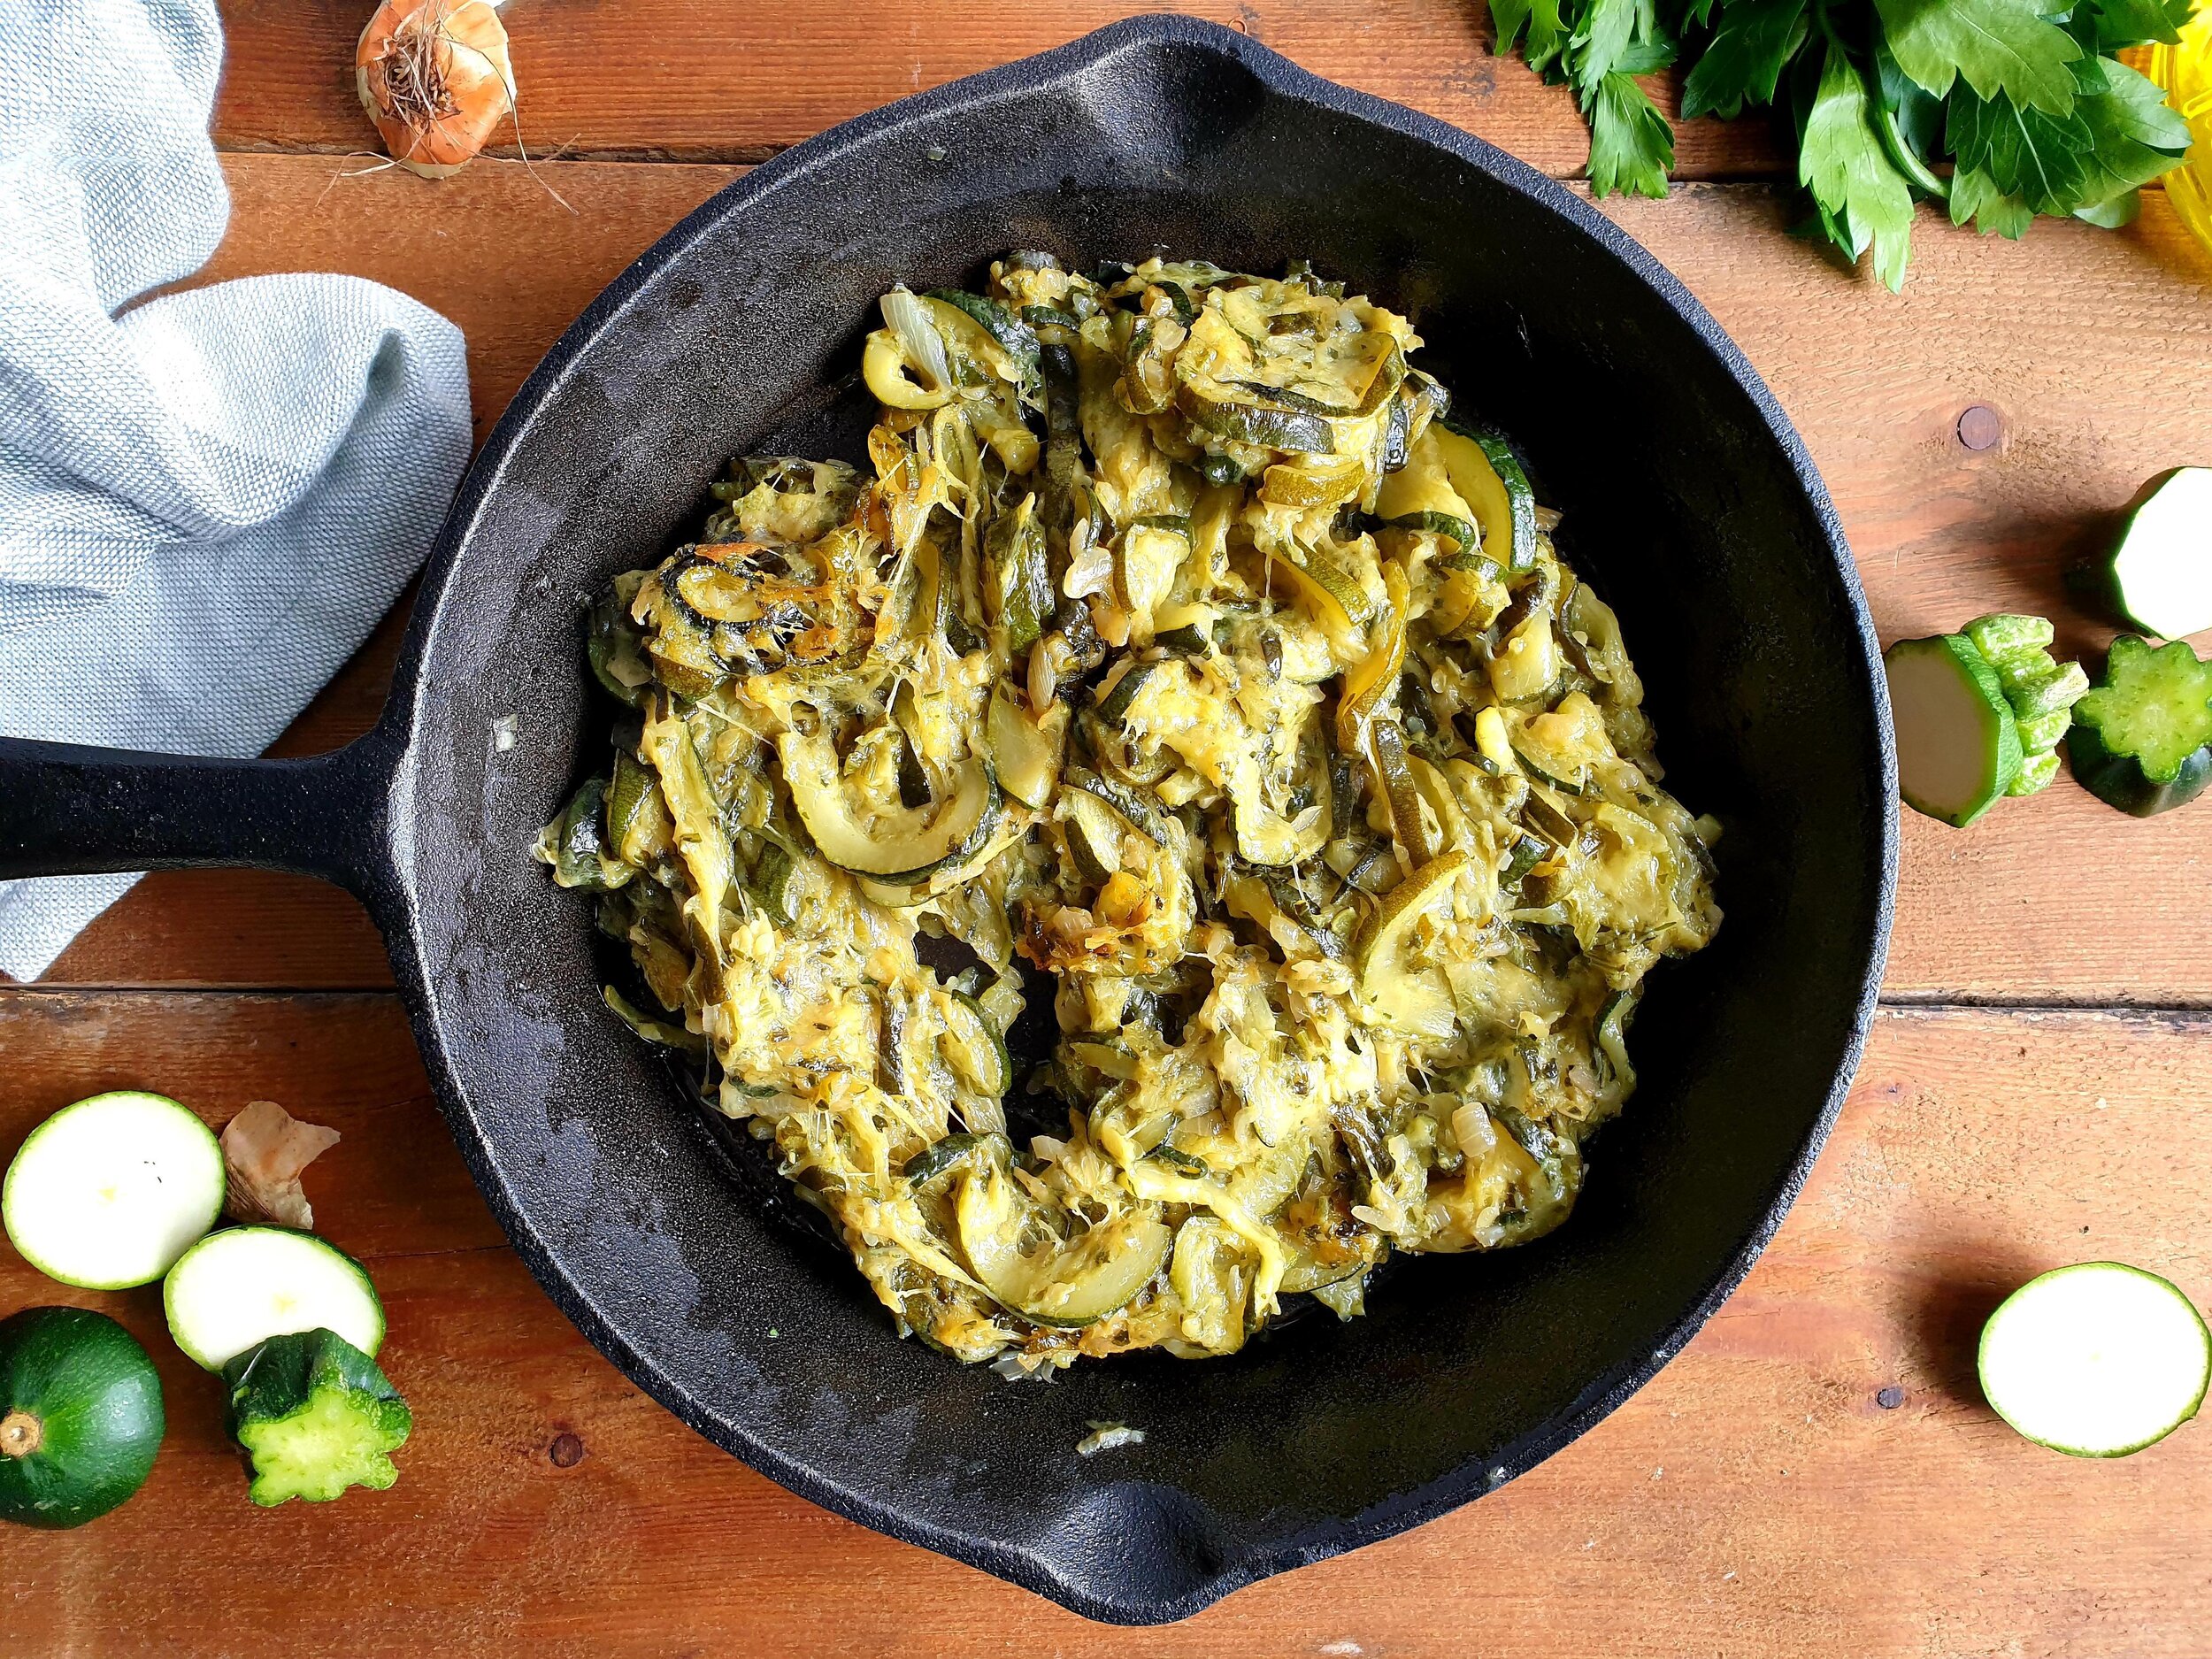 Sautéed courgettes with onions and parsley